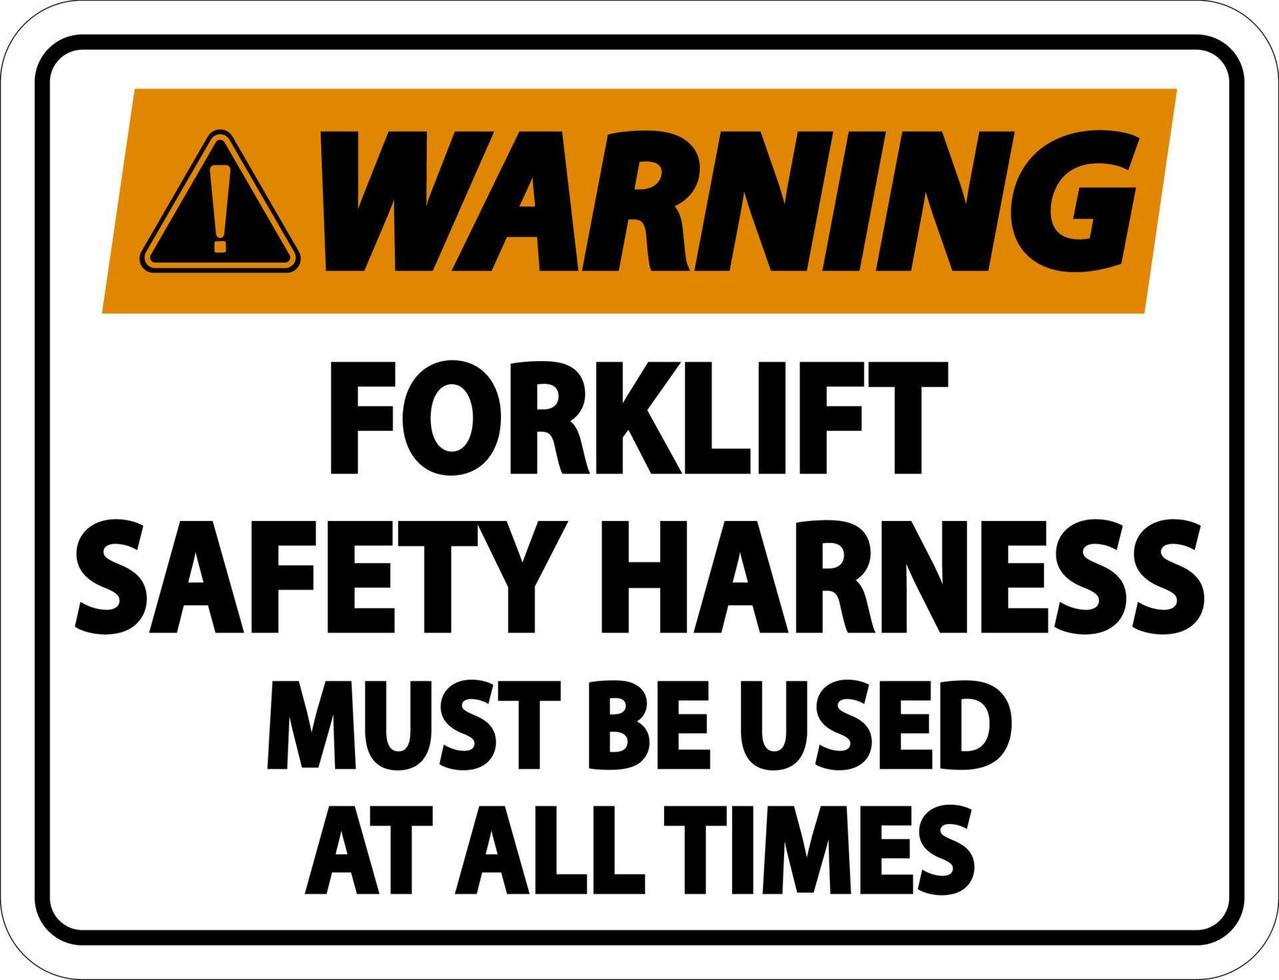 Warning Forklift Safety Harness Sign On White Background vector